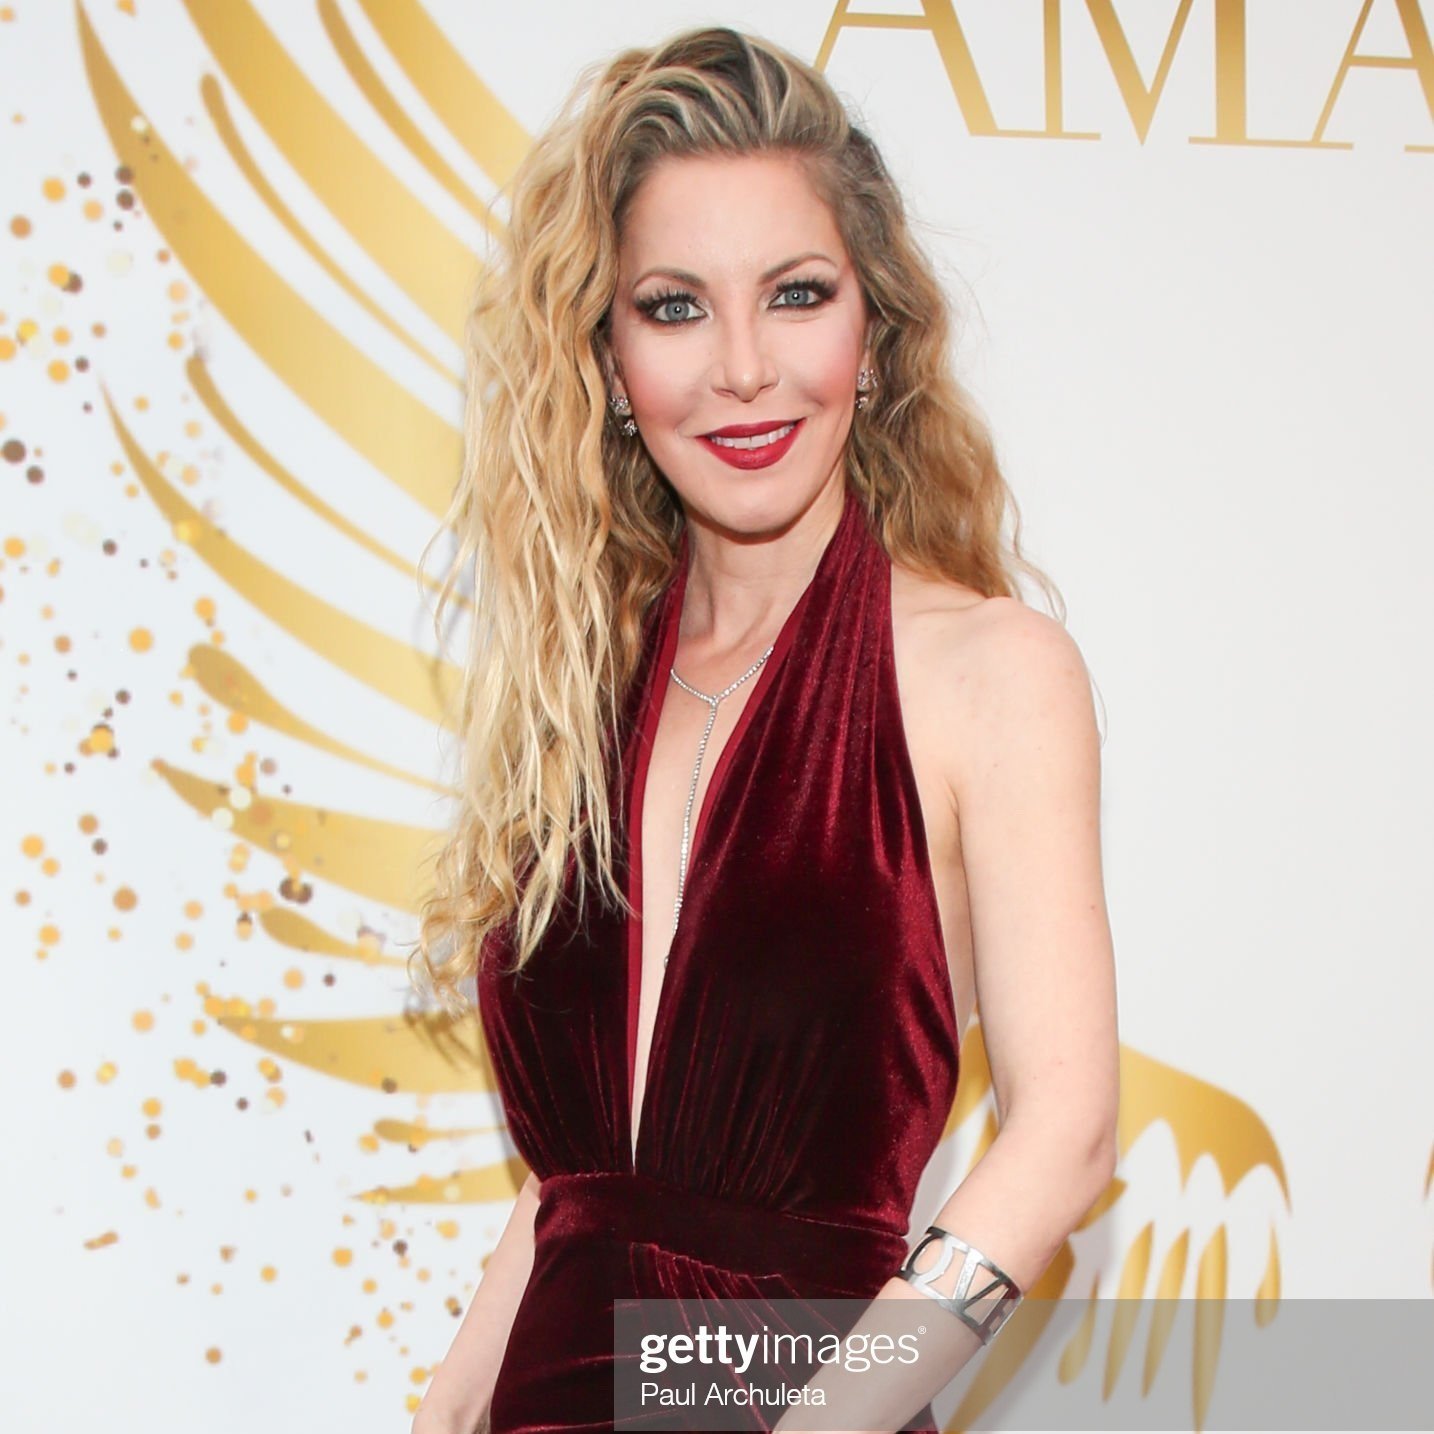 gettyimages-1371709461-2048x2048.jpg